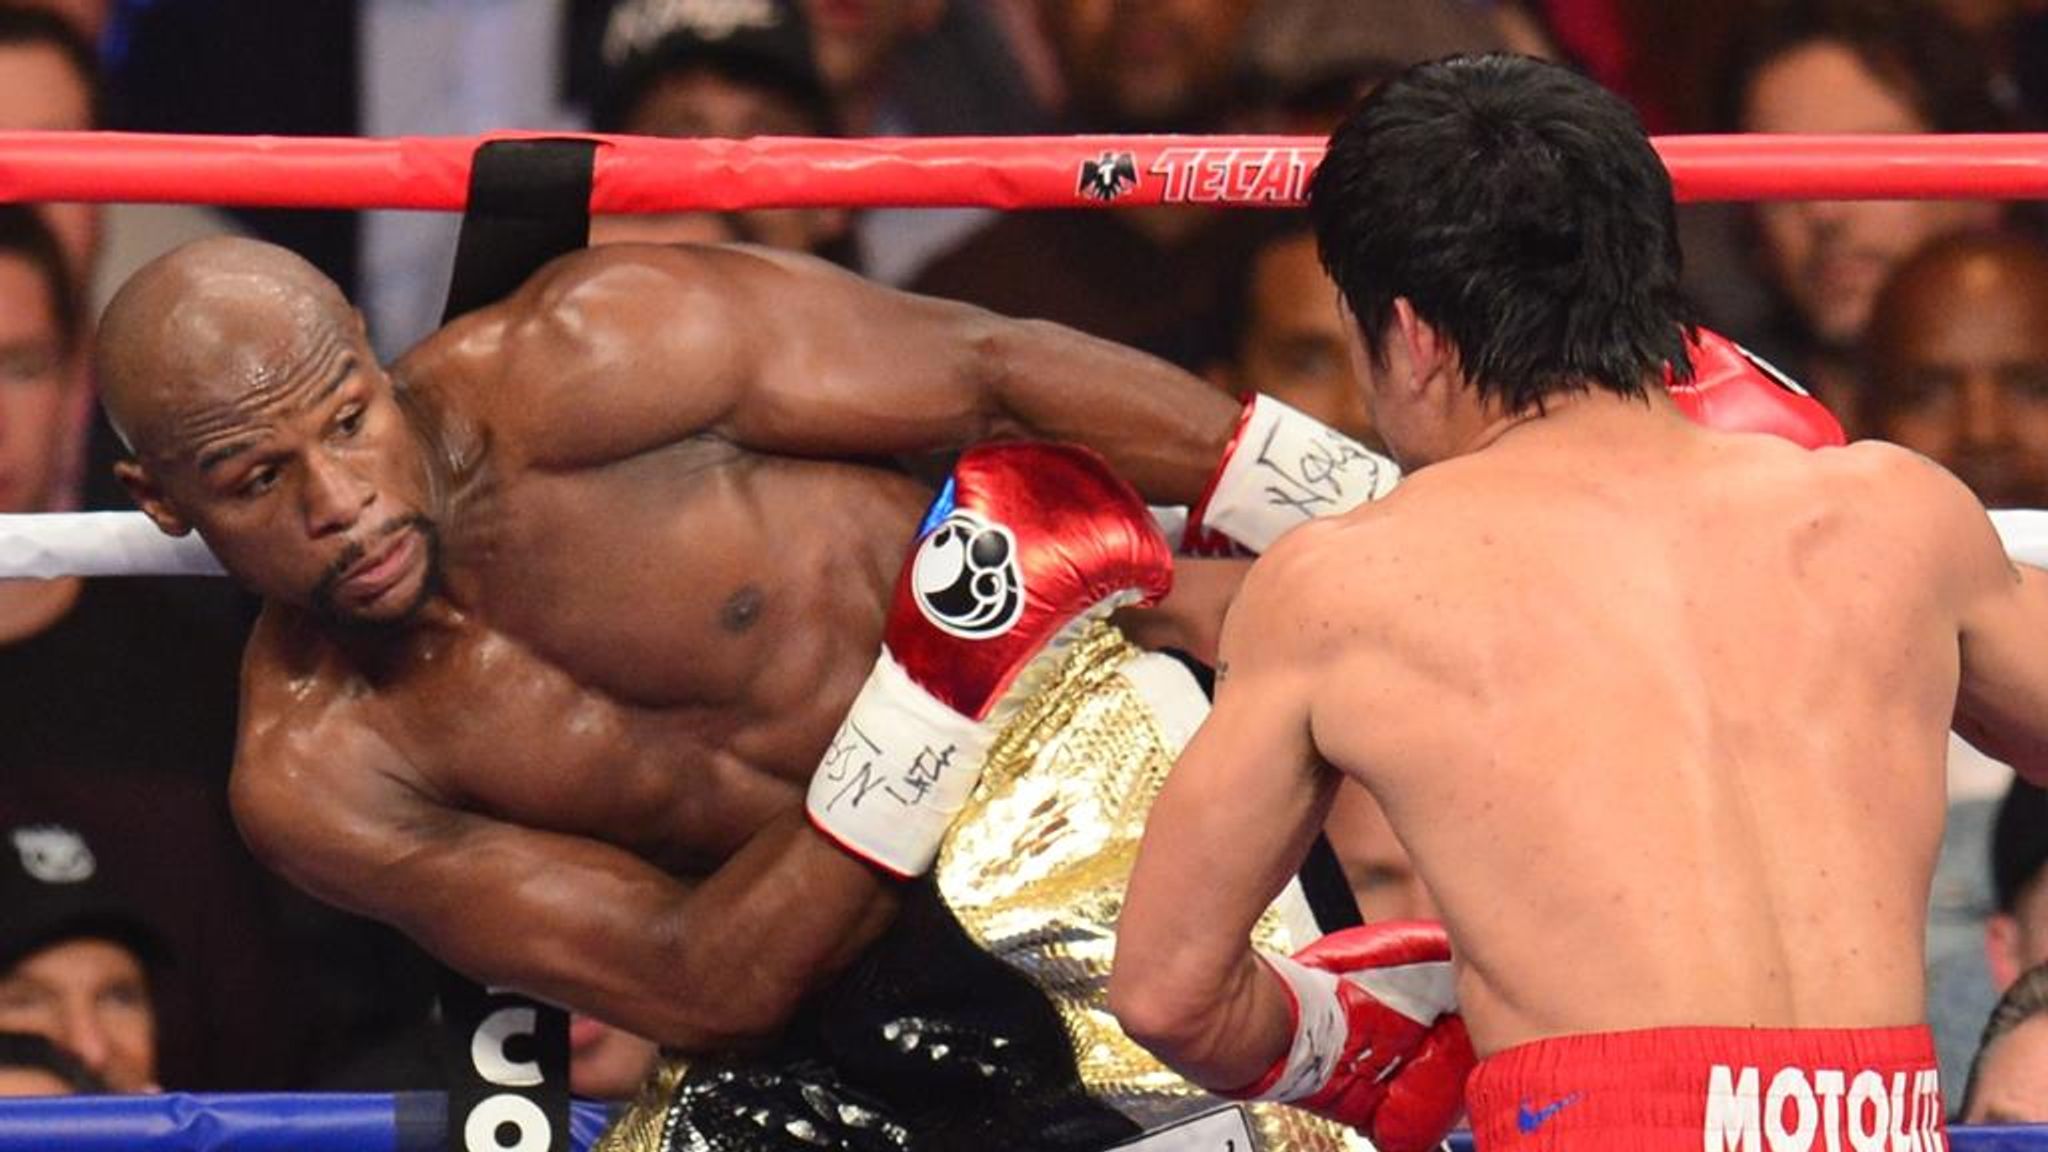 Here's What Everyone Wore To The Mayweather Vs. Pacquiao Fight